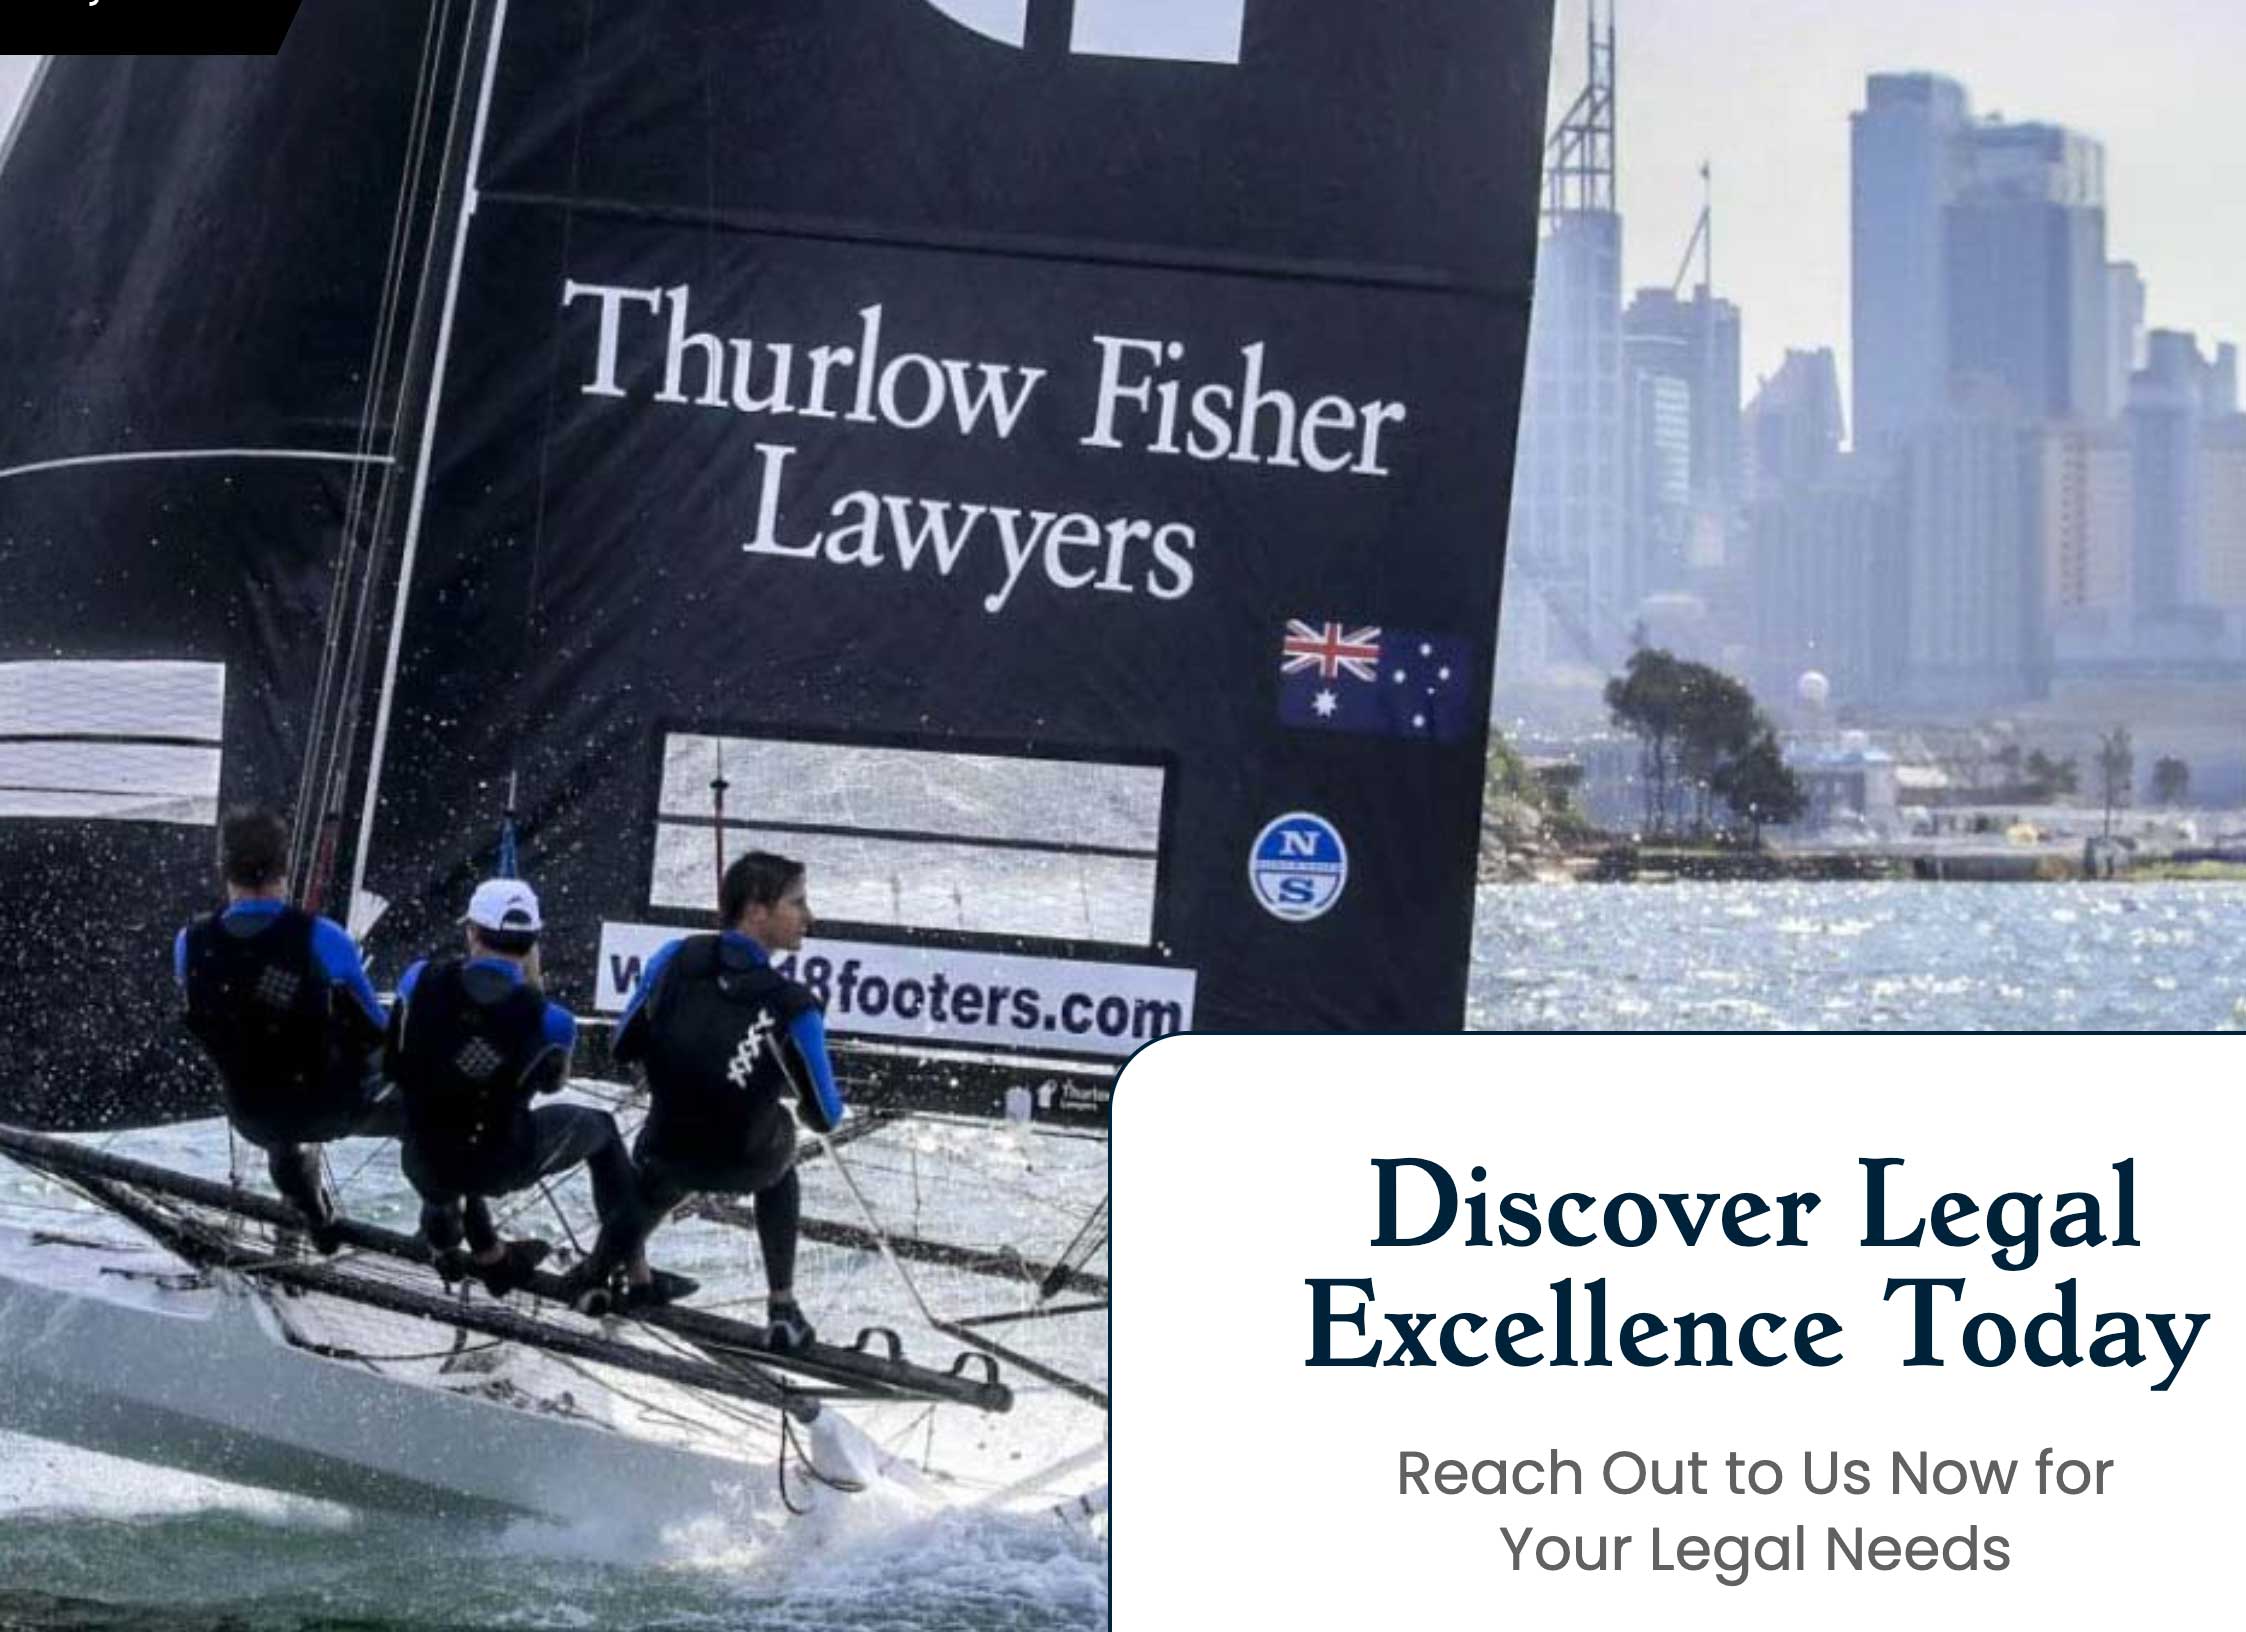 Thurlow Fisher Lawyers